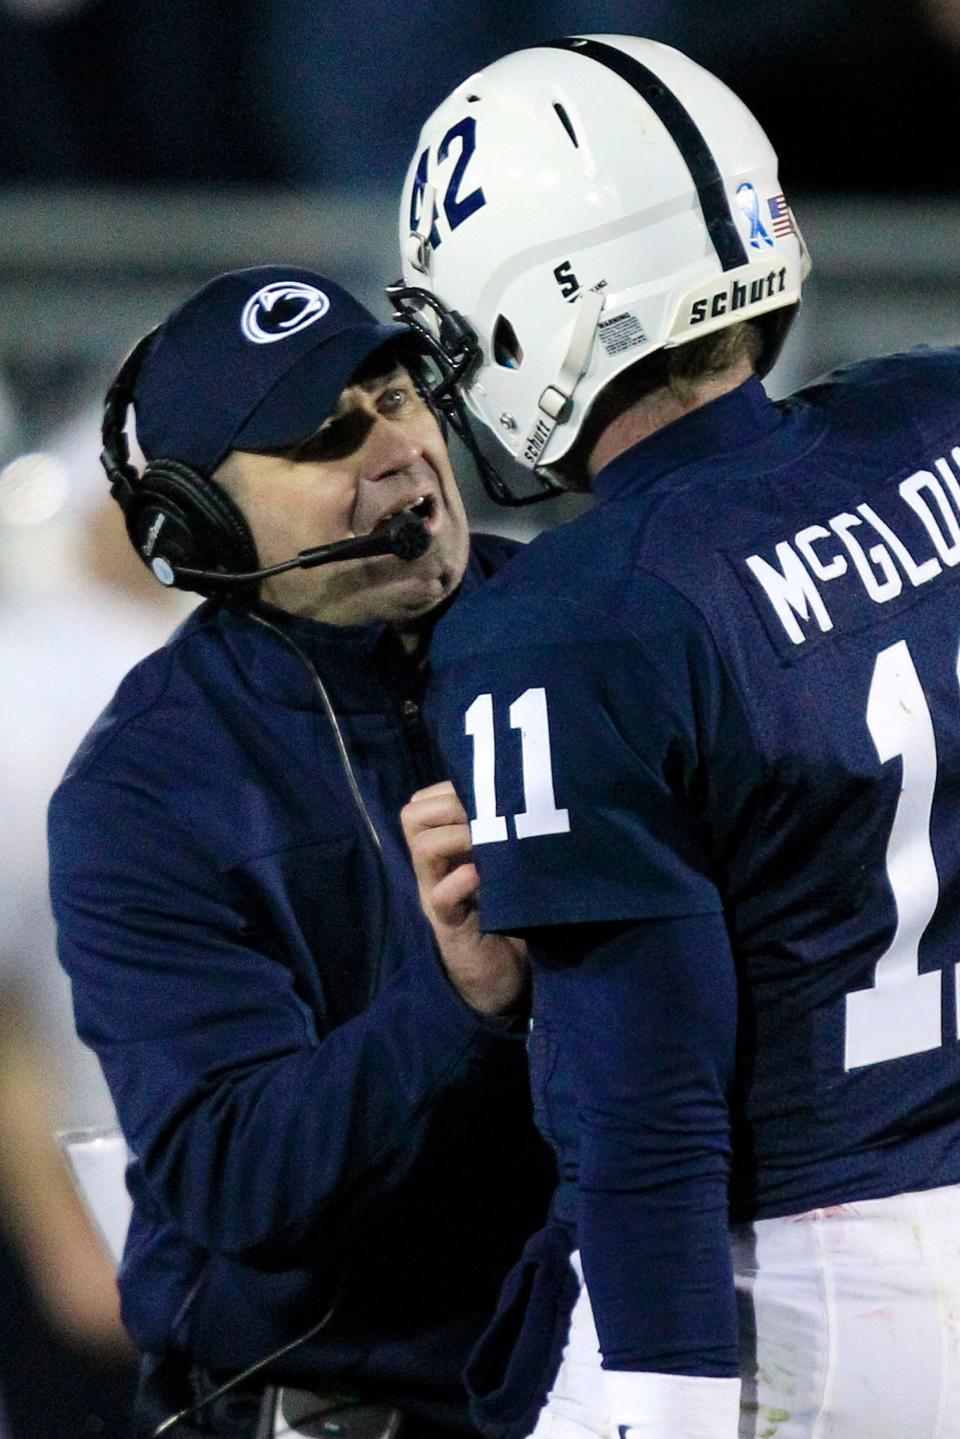 Penn State quarterback Matthew McGloin (11) gets a play from Penn State head coach Bill O'Brien during the fourth quarter of an NCAA college football game against Wisconsin in State College, Pa., Saturday, Nov. 24, 2012. Penn State won in overtime 24-21. (AP Photo/Gene J. Puskar)